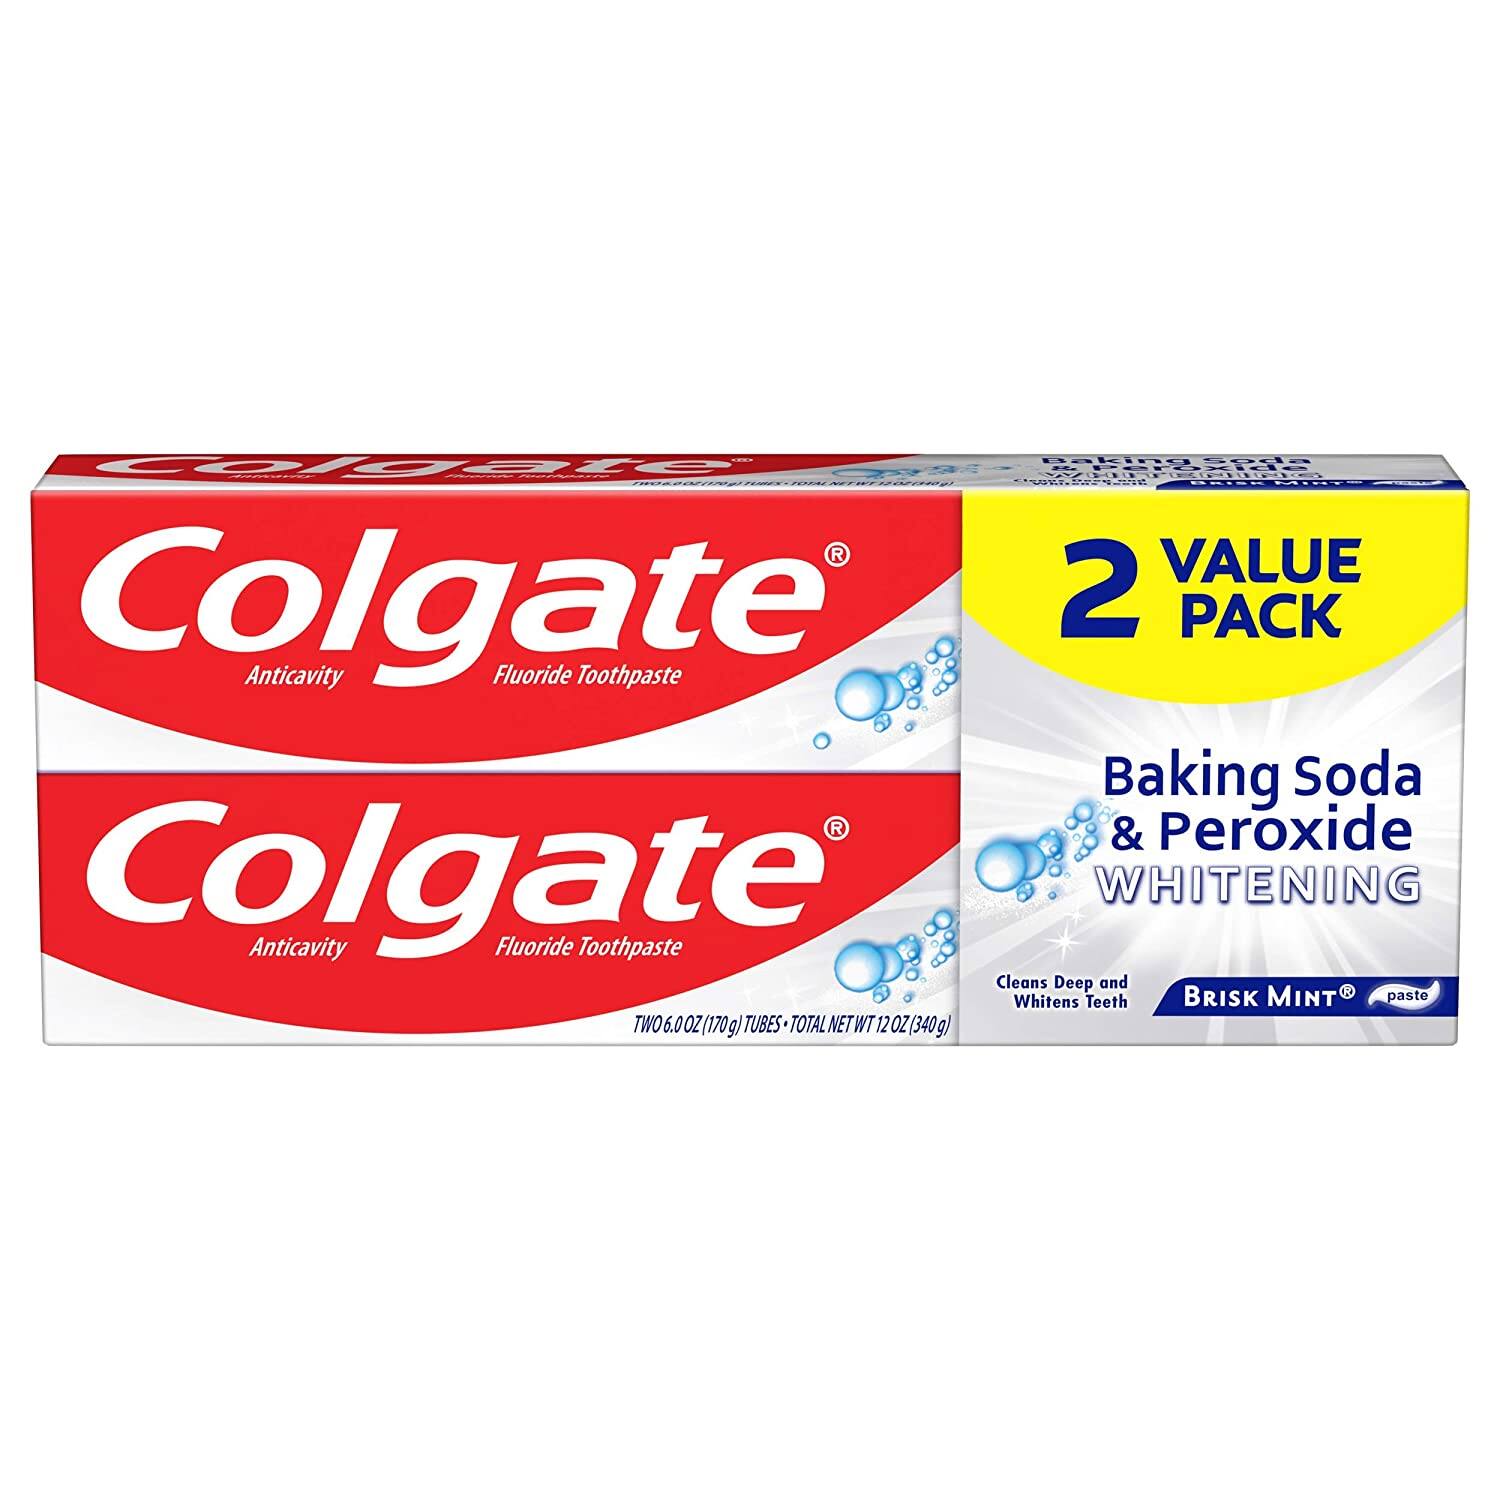 2-Pack 6-Oz Colgate Baking Soda and Peroxide Whitening Toothpaste (Brisk Mint) $1.50 ($0.75 each) + Free S&H w/ Prime or $25+